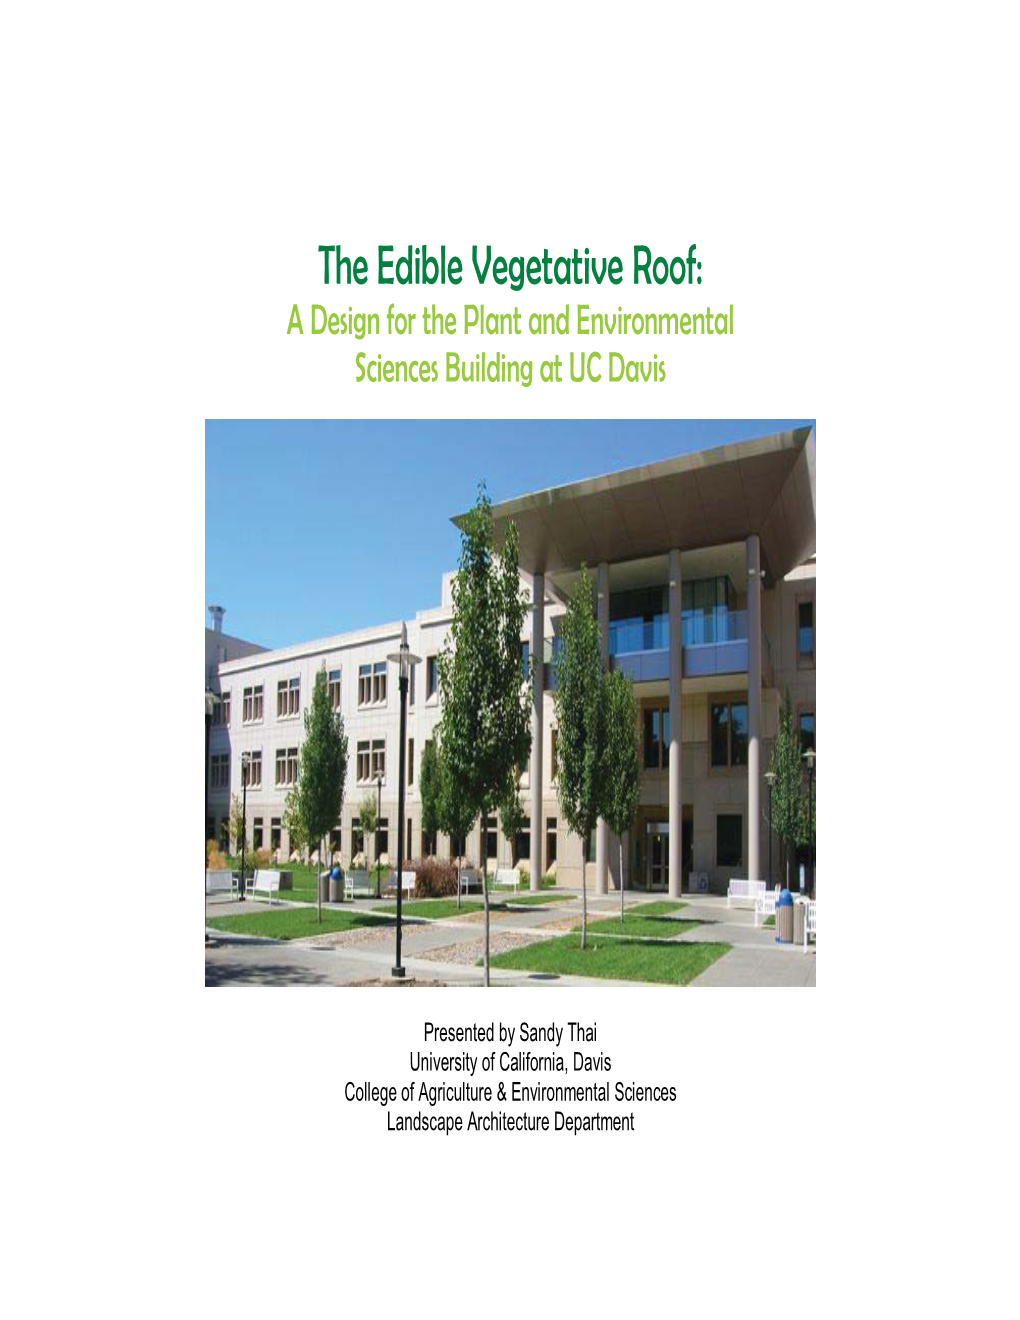 The Edible Vegetative Roof: a Design for the Plant and Environmental Sciences Building at UC Davis